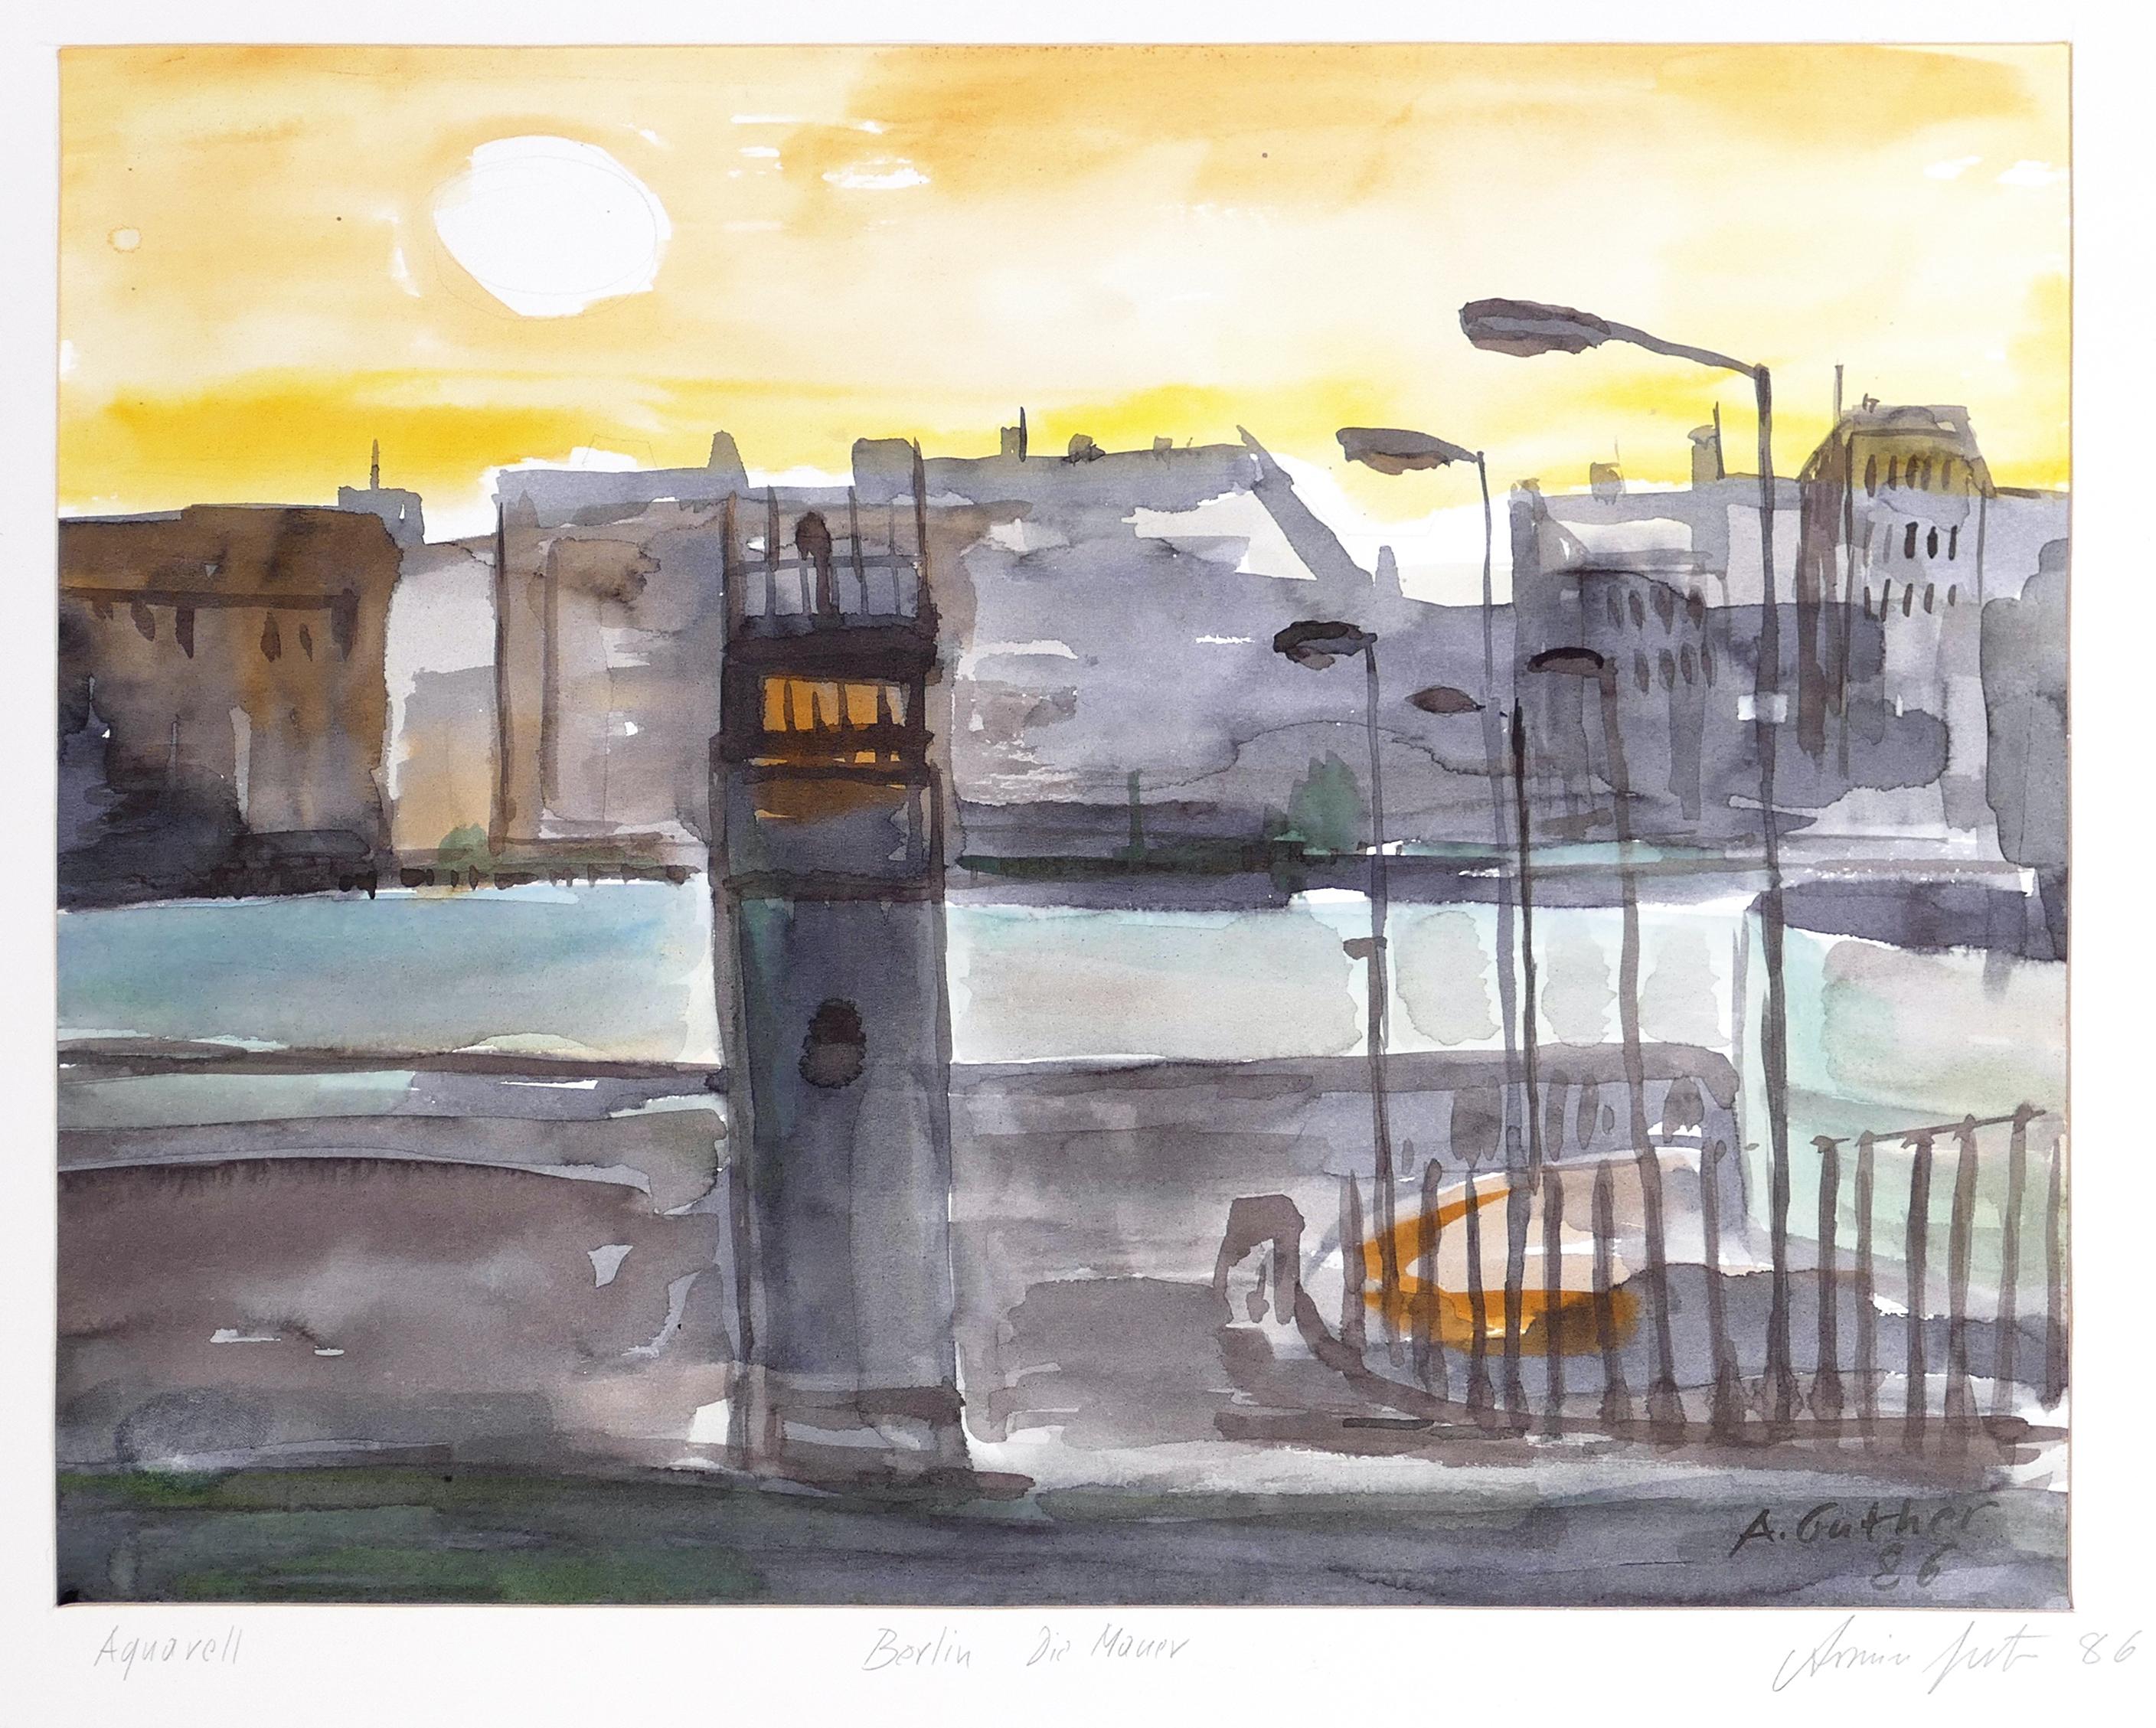 Berlin is an original colored watercolor realized in 1986 by Armin Guther.

Good conditions. Includes passepartout (50 x 60 cm).

The artwork is hand-signed and dated on the lower right corner. 
Original title is handwritten on the lower center